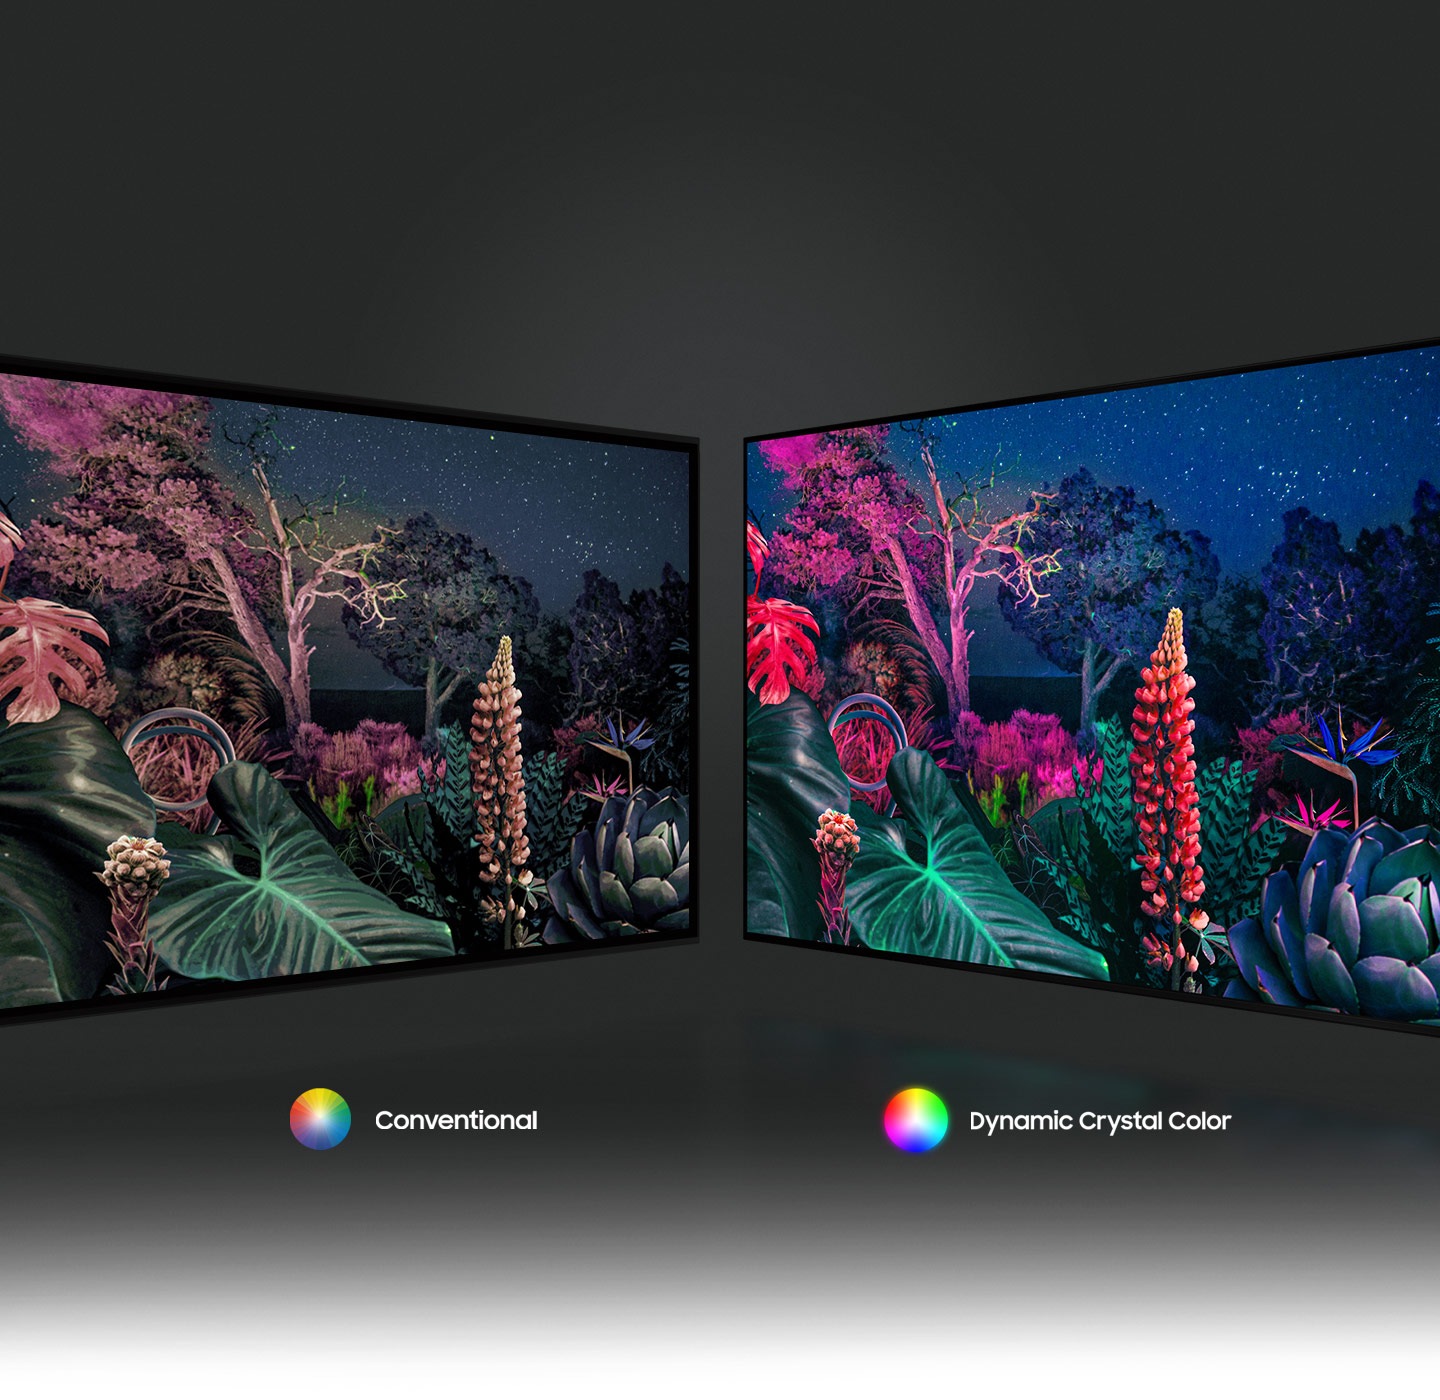 The forest image on the right demonstrates a more intricately colored image due to Dynamic Crystal Color technology compare to the conventional on the left. SAMSUNG 43" Crystal 4K Smart UHD TV UA43AU8000RSFS